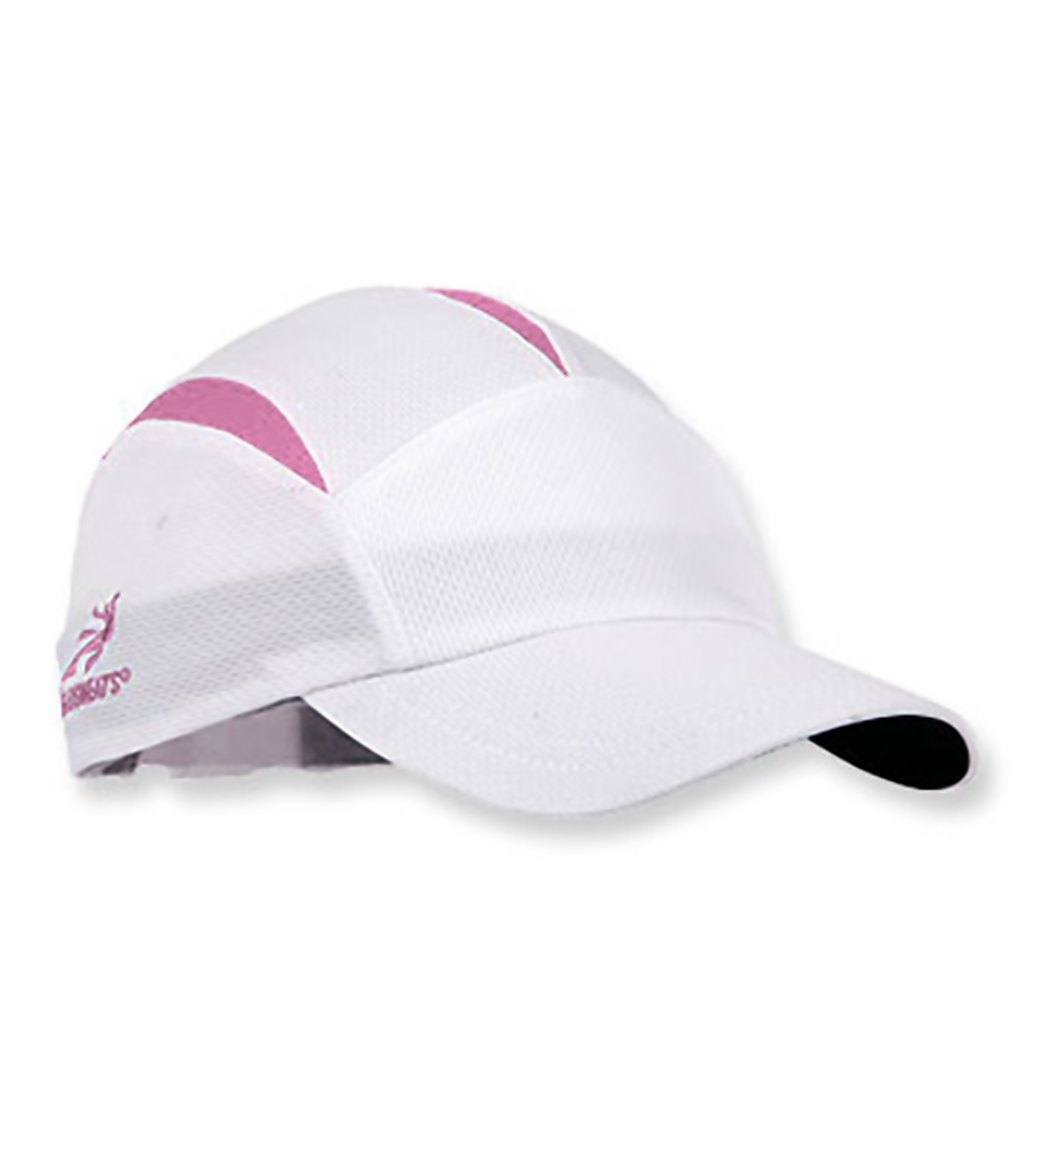 Headsweats Go Hat - Pink Cotton/Polyester - Swimoutlet.com